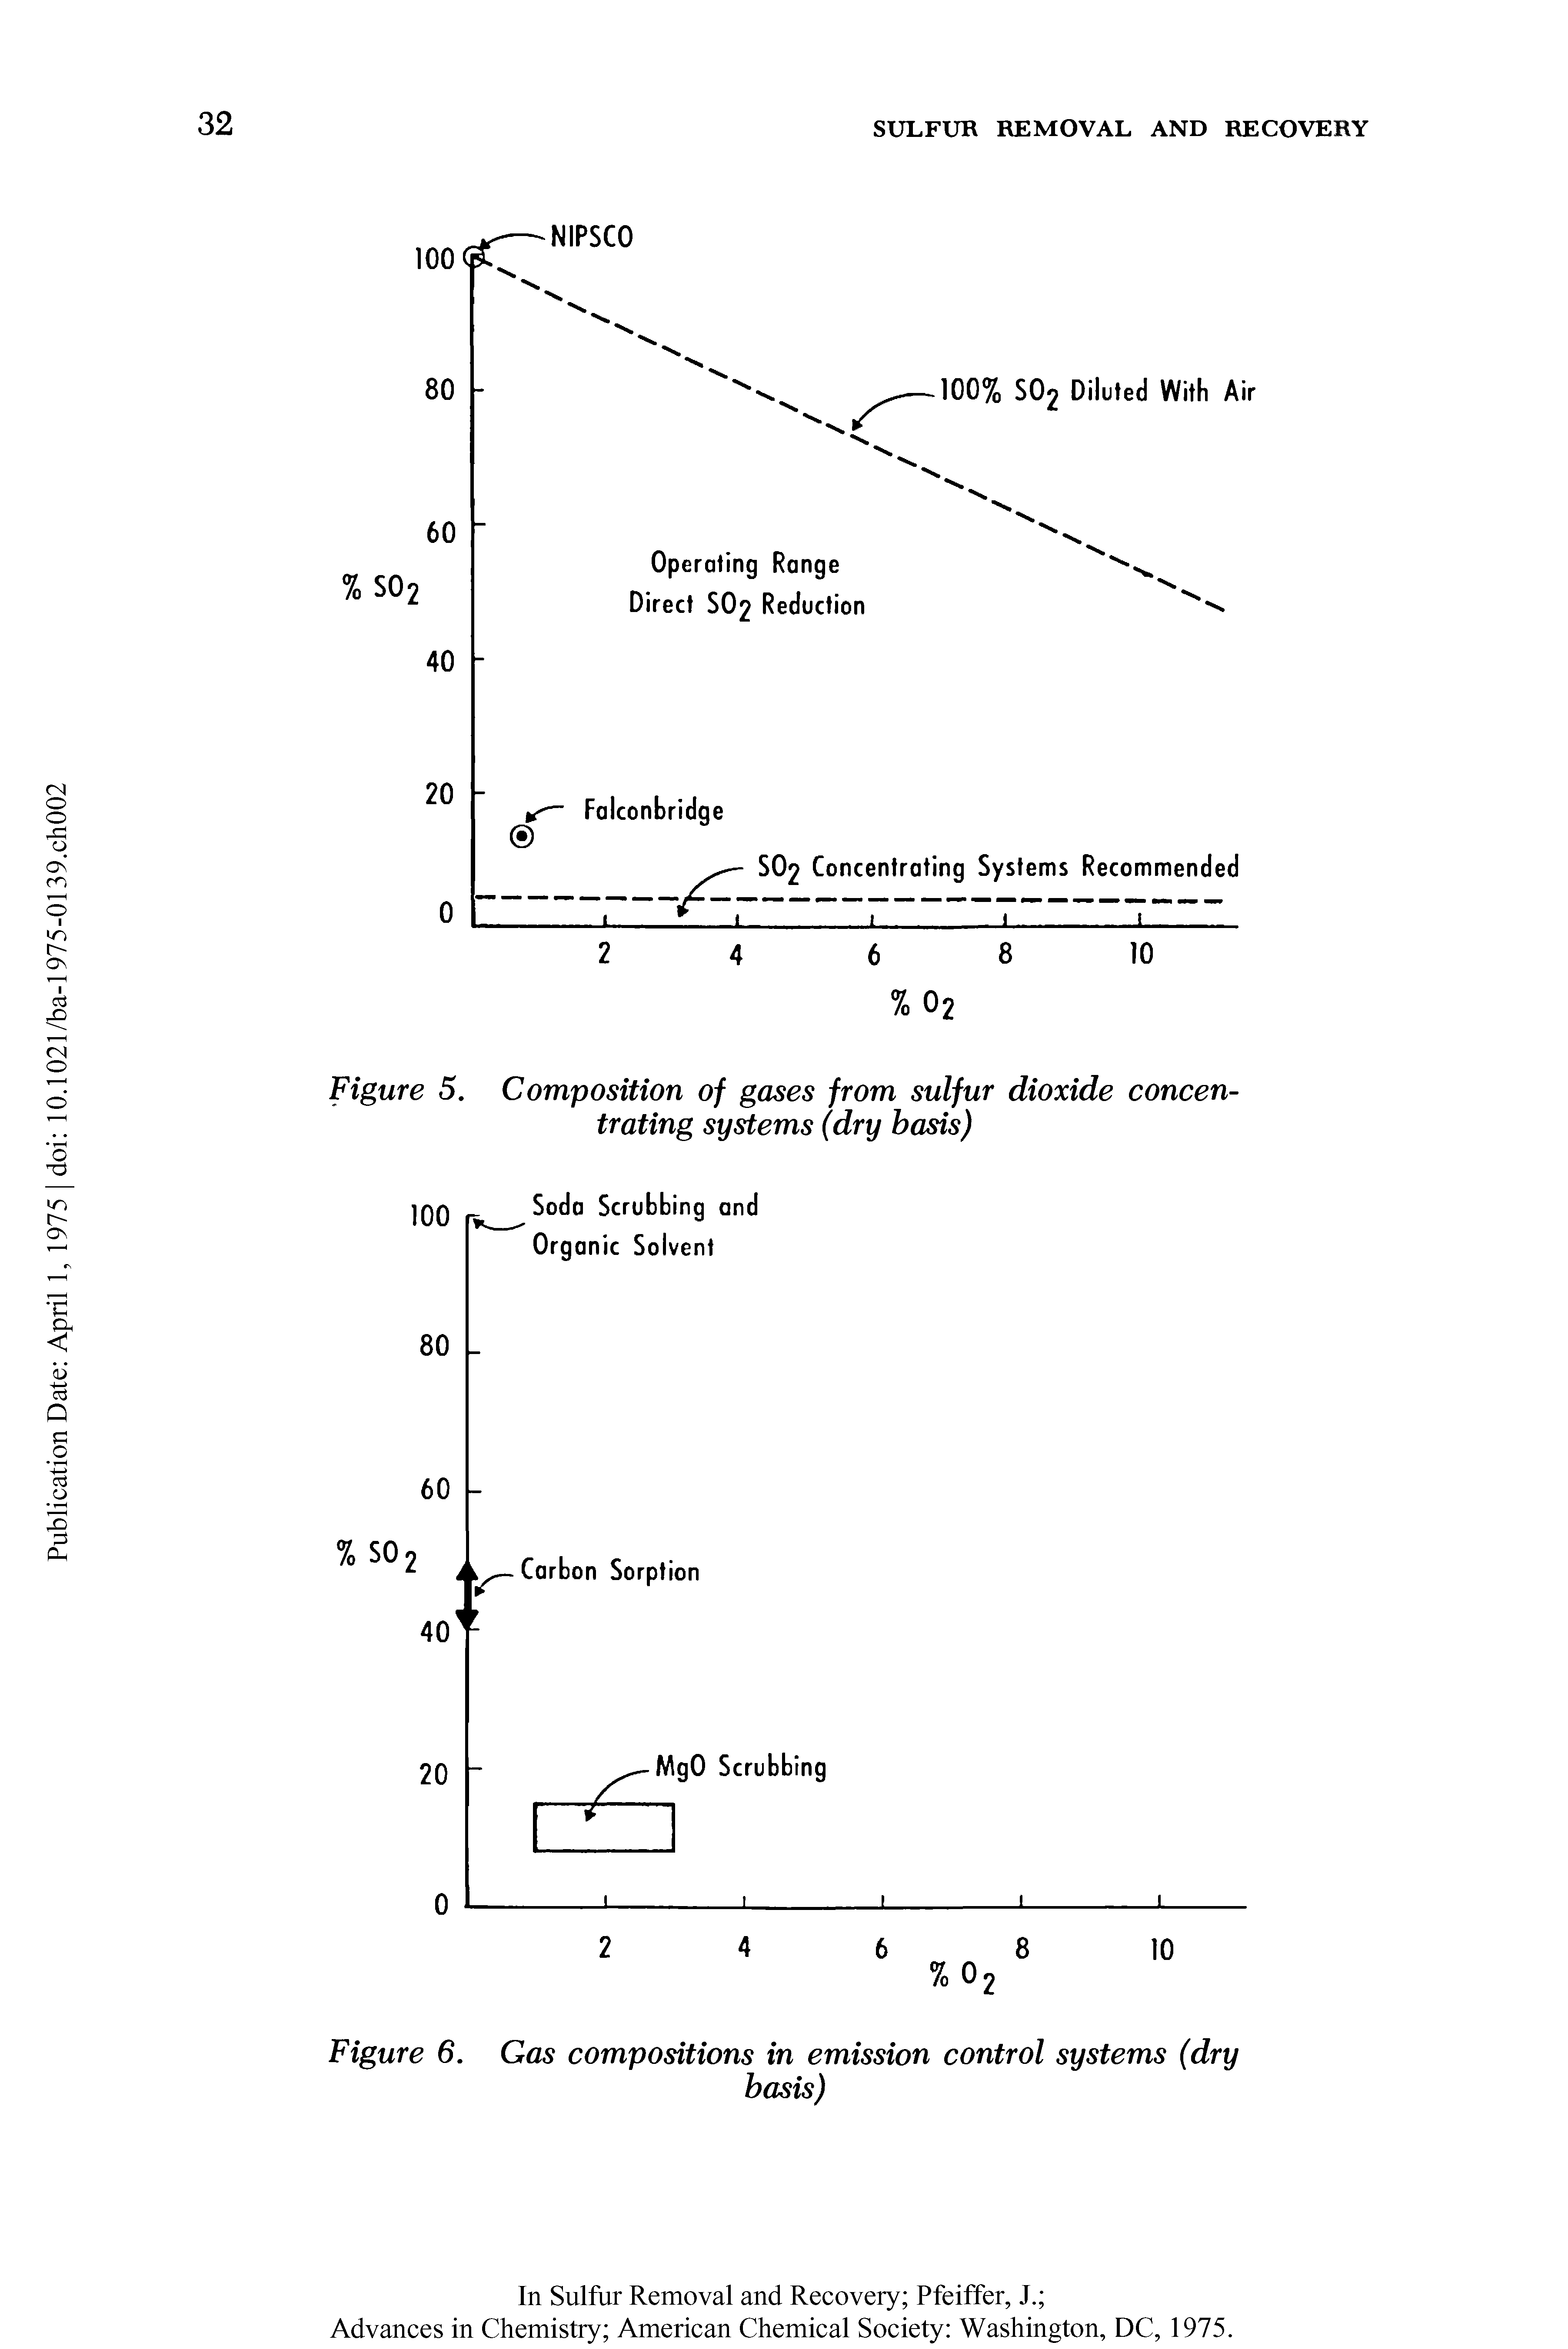 Figure 5. Composition of gases from sulfur dioxide concentrating systems (dry basis)...